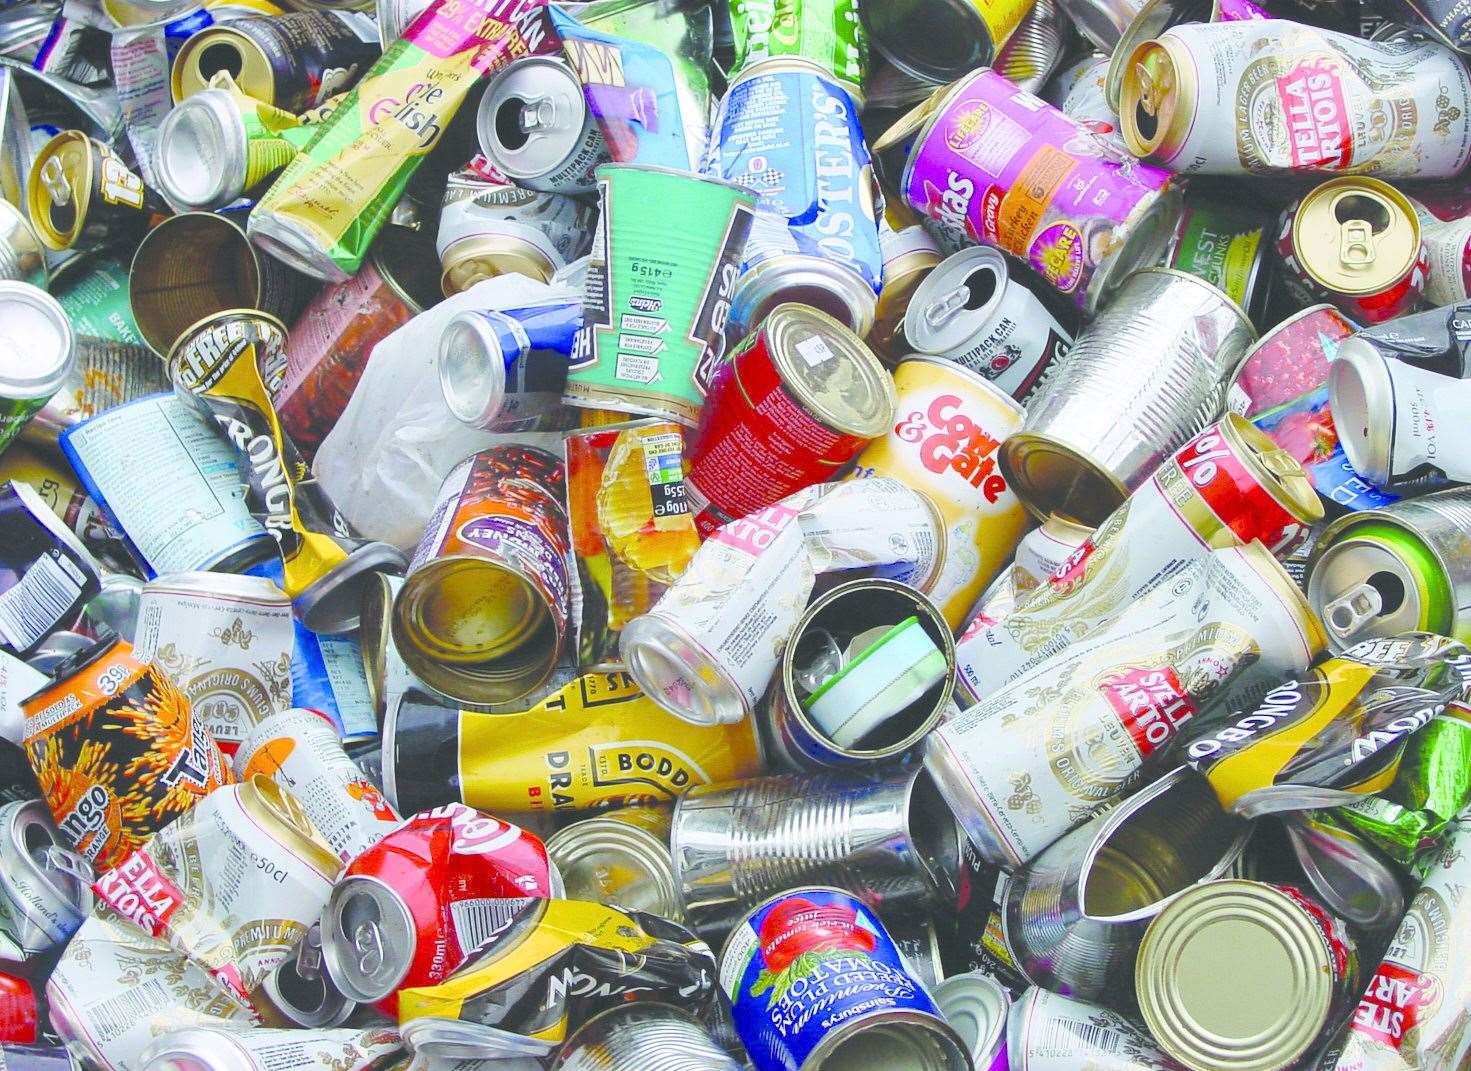 Recycling services have been suspended in Bexley. Photo: Bexley council